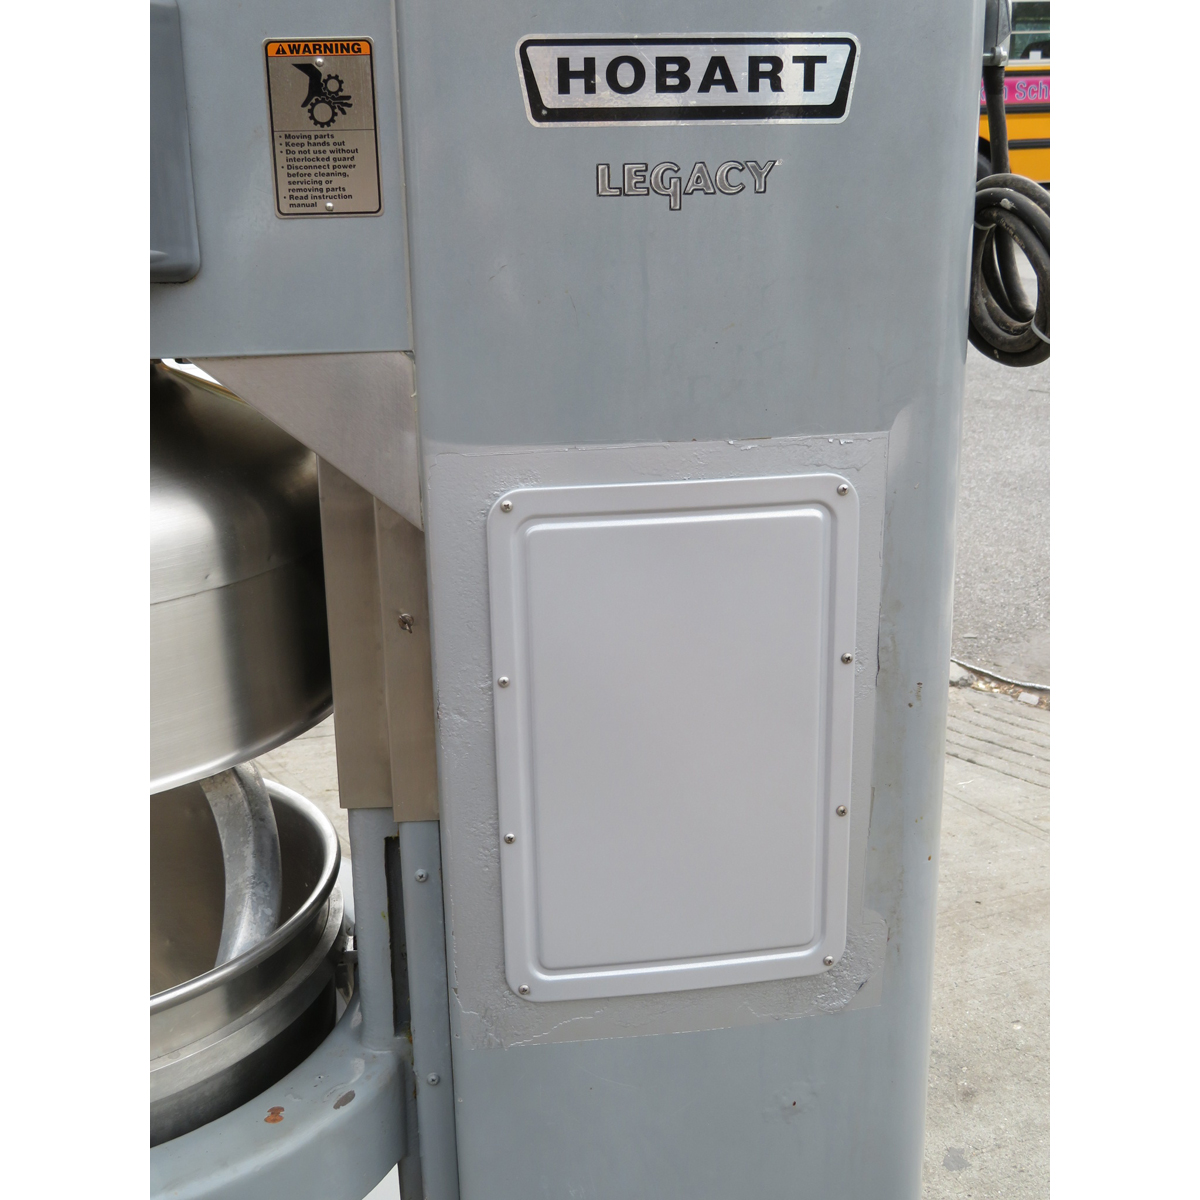 Hobart 60 Quart HL600 Legacy Mixer with Bowl Guard, Used Good Condition image 5